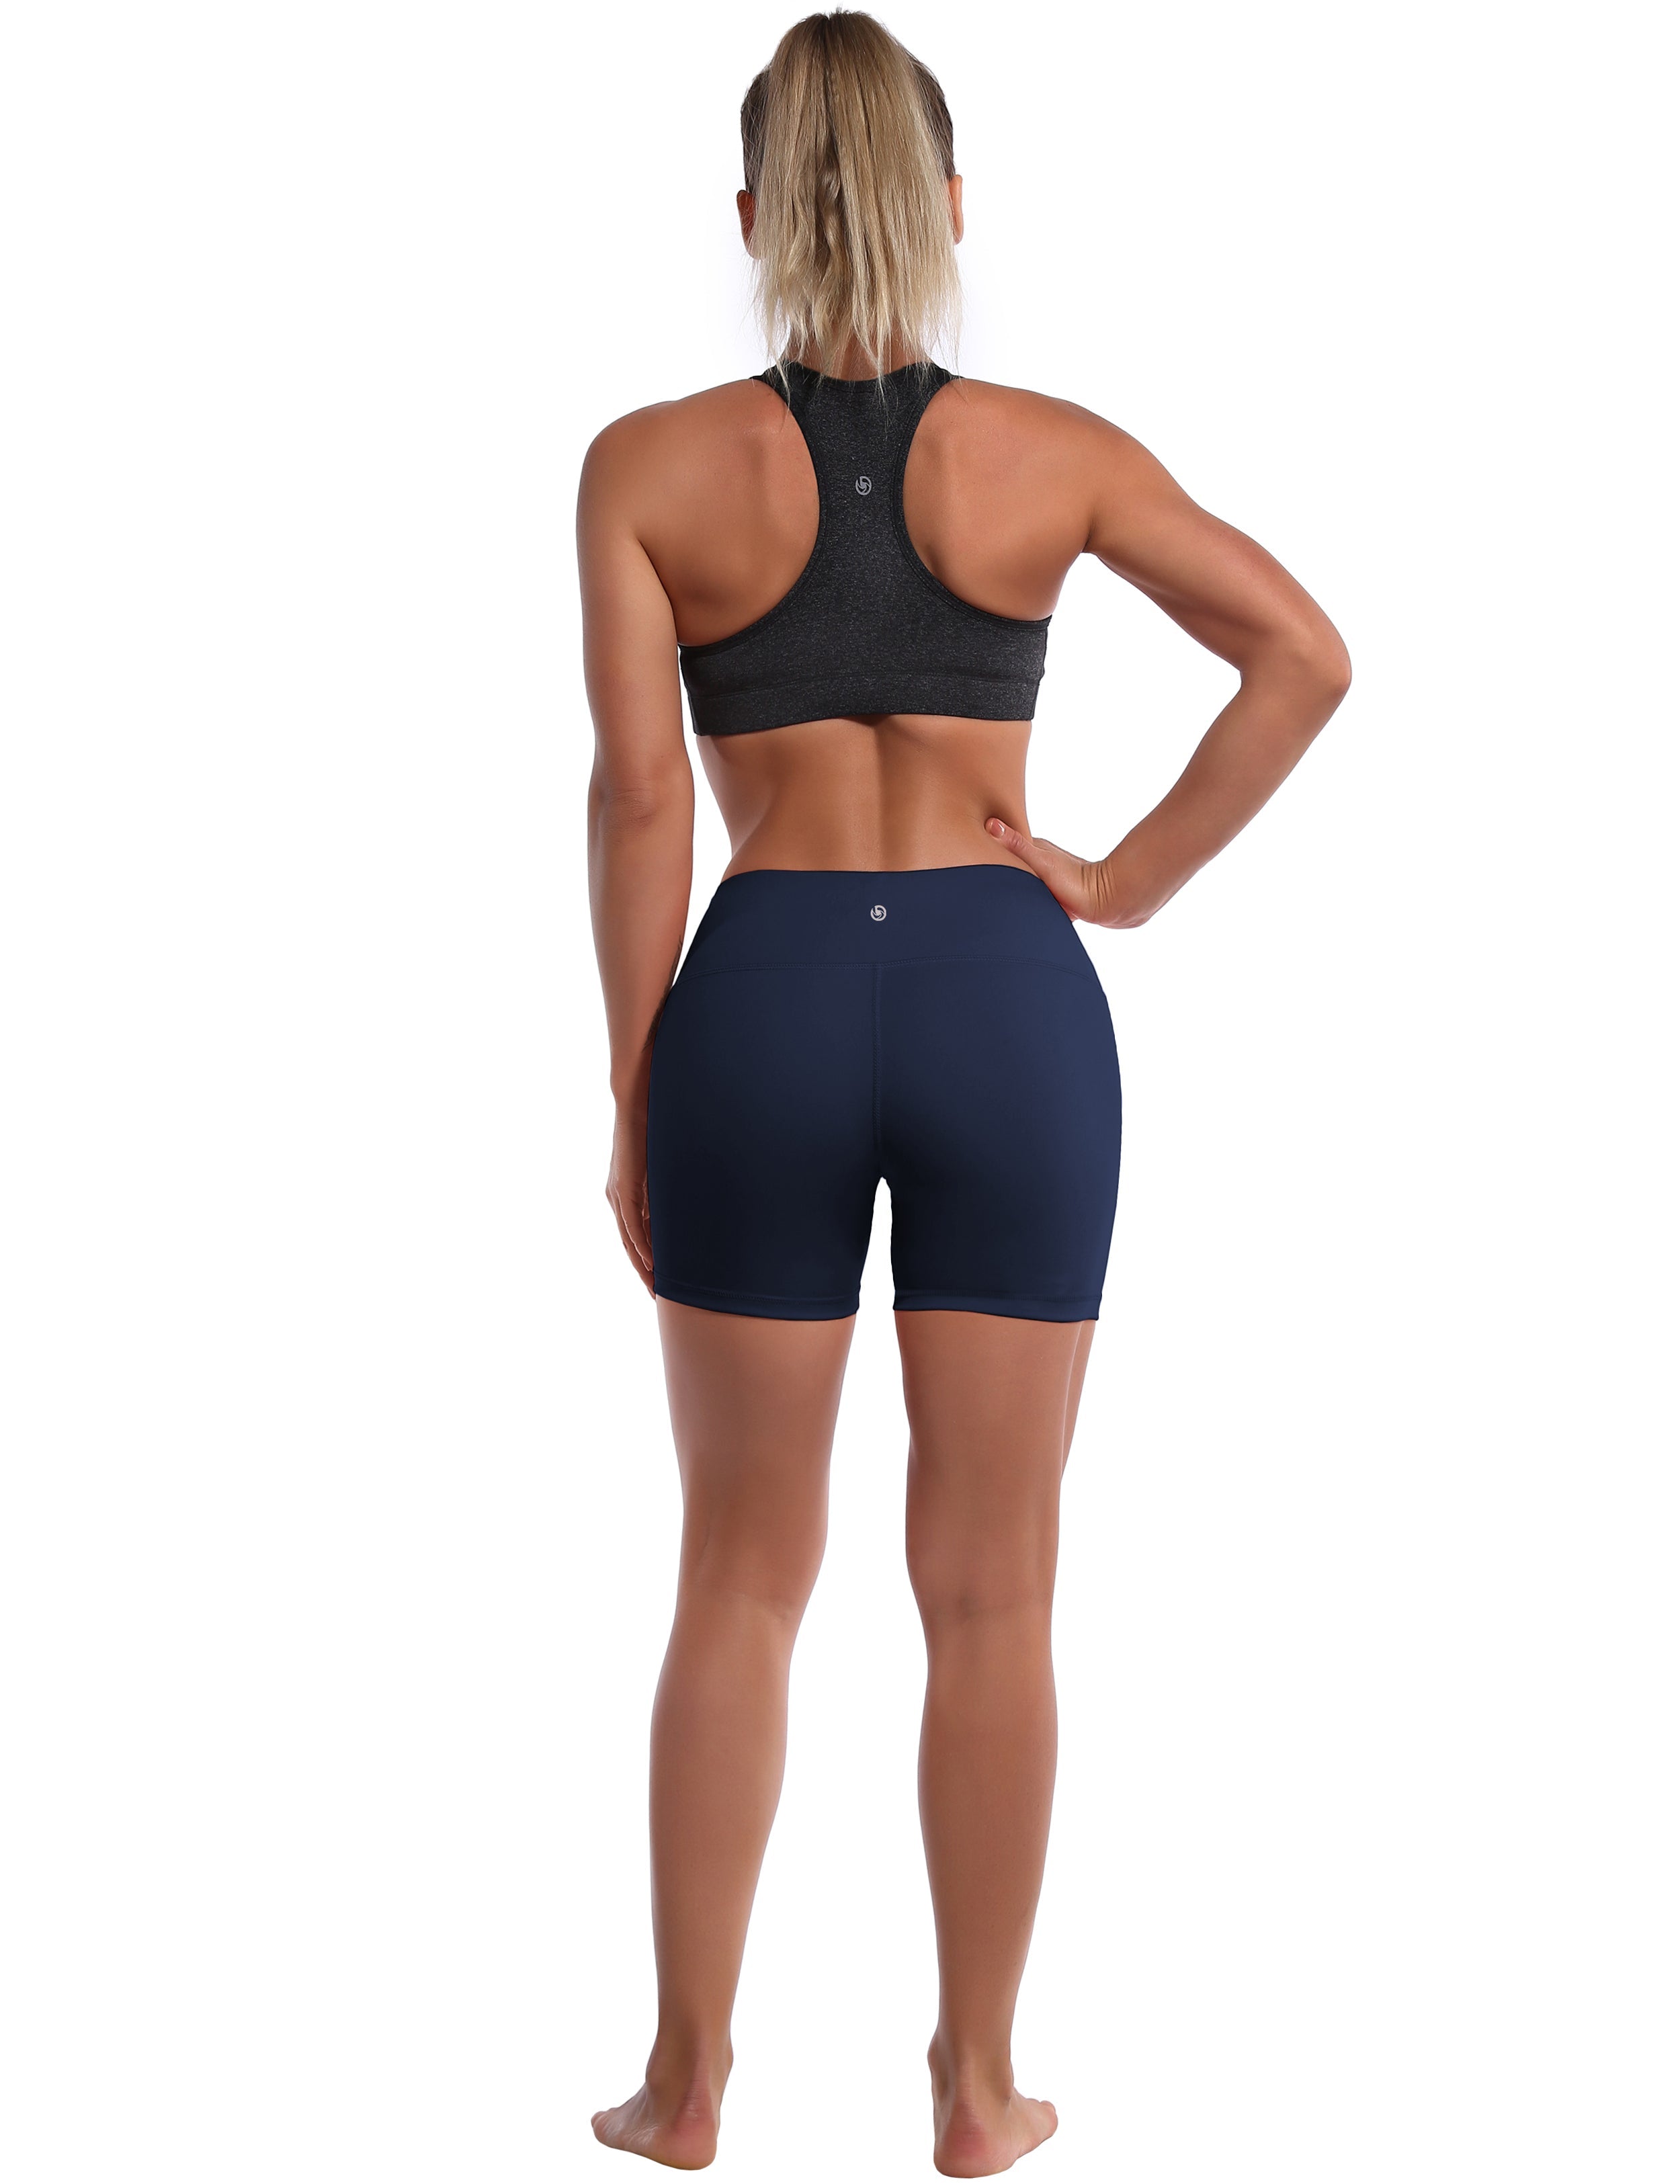 4" Tall Size Shorts darknavy Sleek, soft, smooth and totally comfortable: our newest style is here. Softest-ever fabric High elasticity High density 4-way stretch Fabric doesn't attract lint easily No see-through Moisture-wicking Machine wash 75% Nylon, 25% Spandex